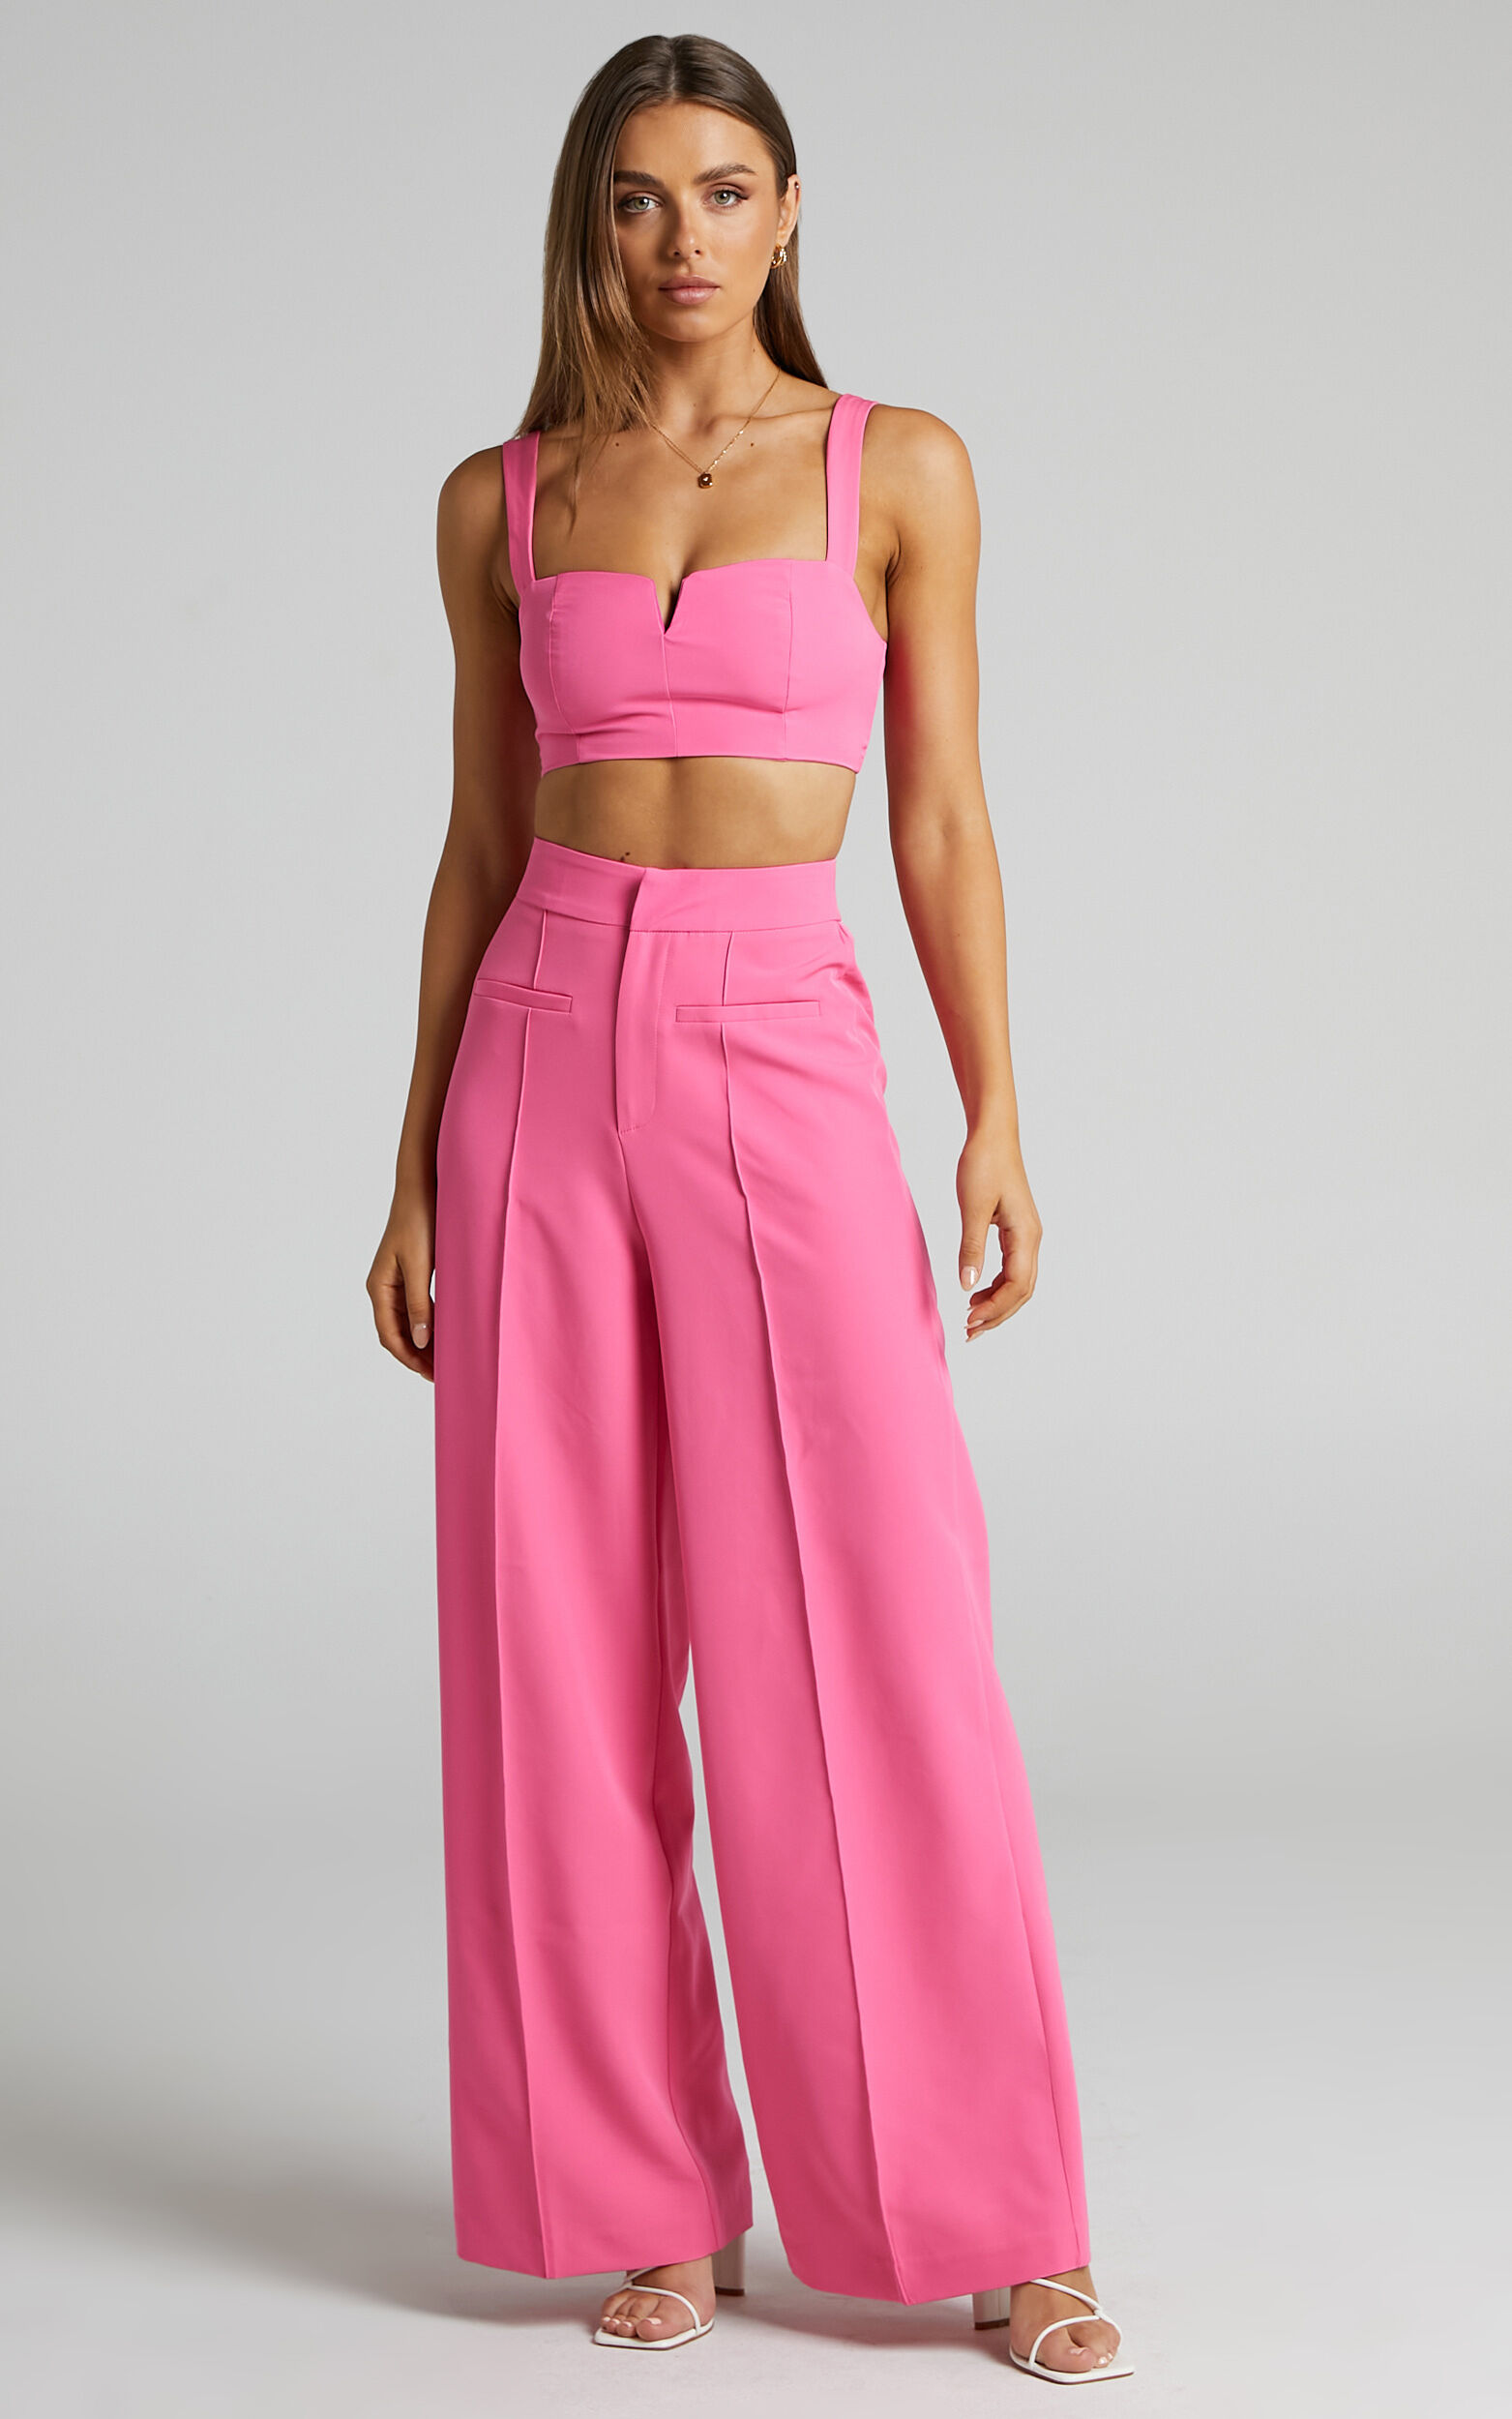 Maida V-Front Crop Top and Wide Leg Pants Two Piece Set in Pink - 06, PNK1, super-hi-res image number null